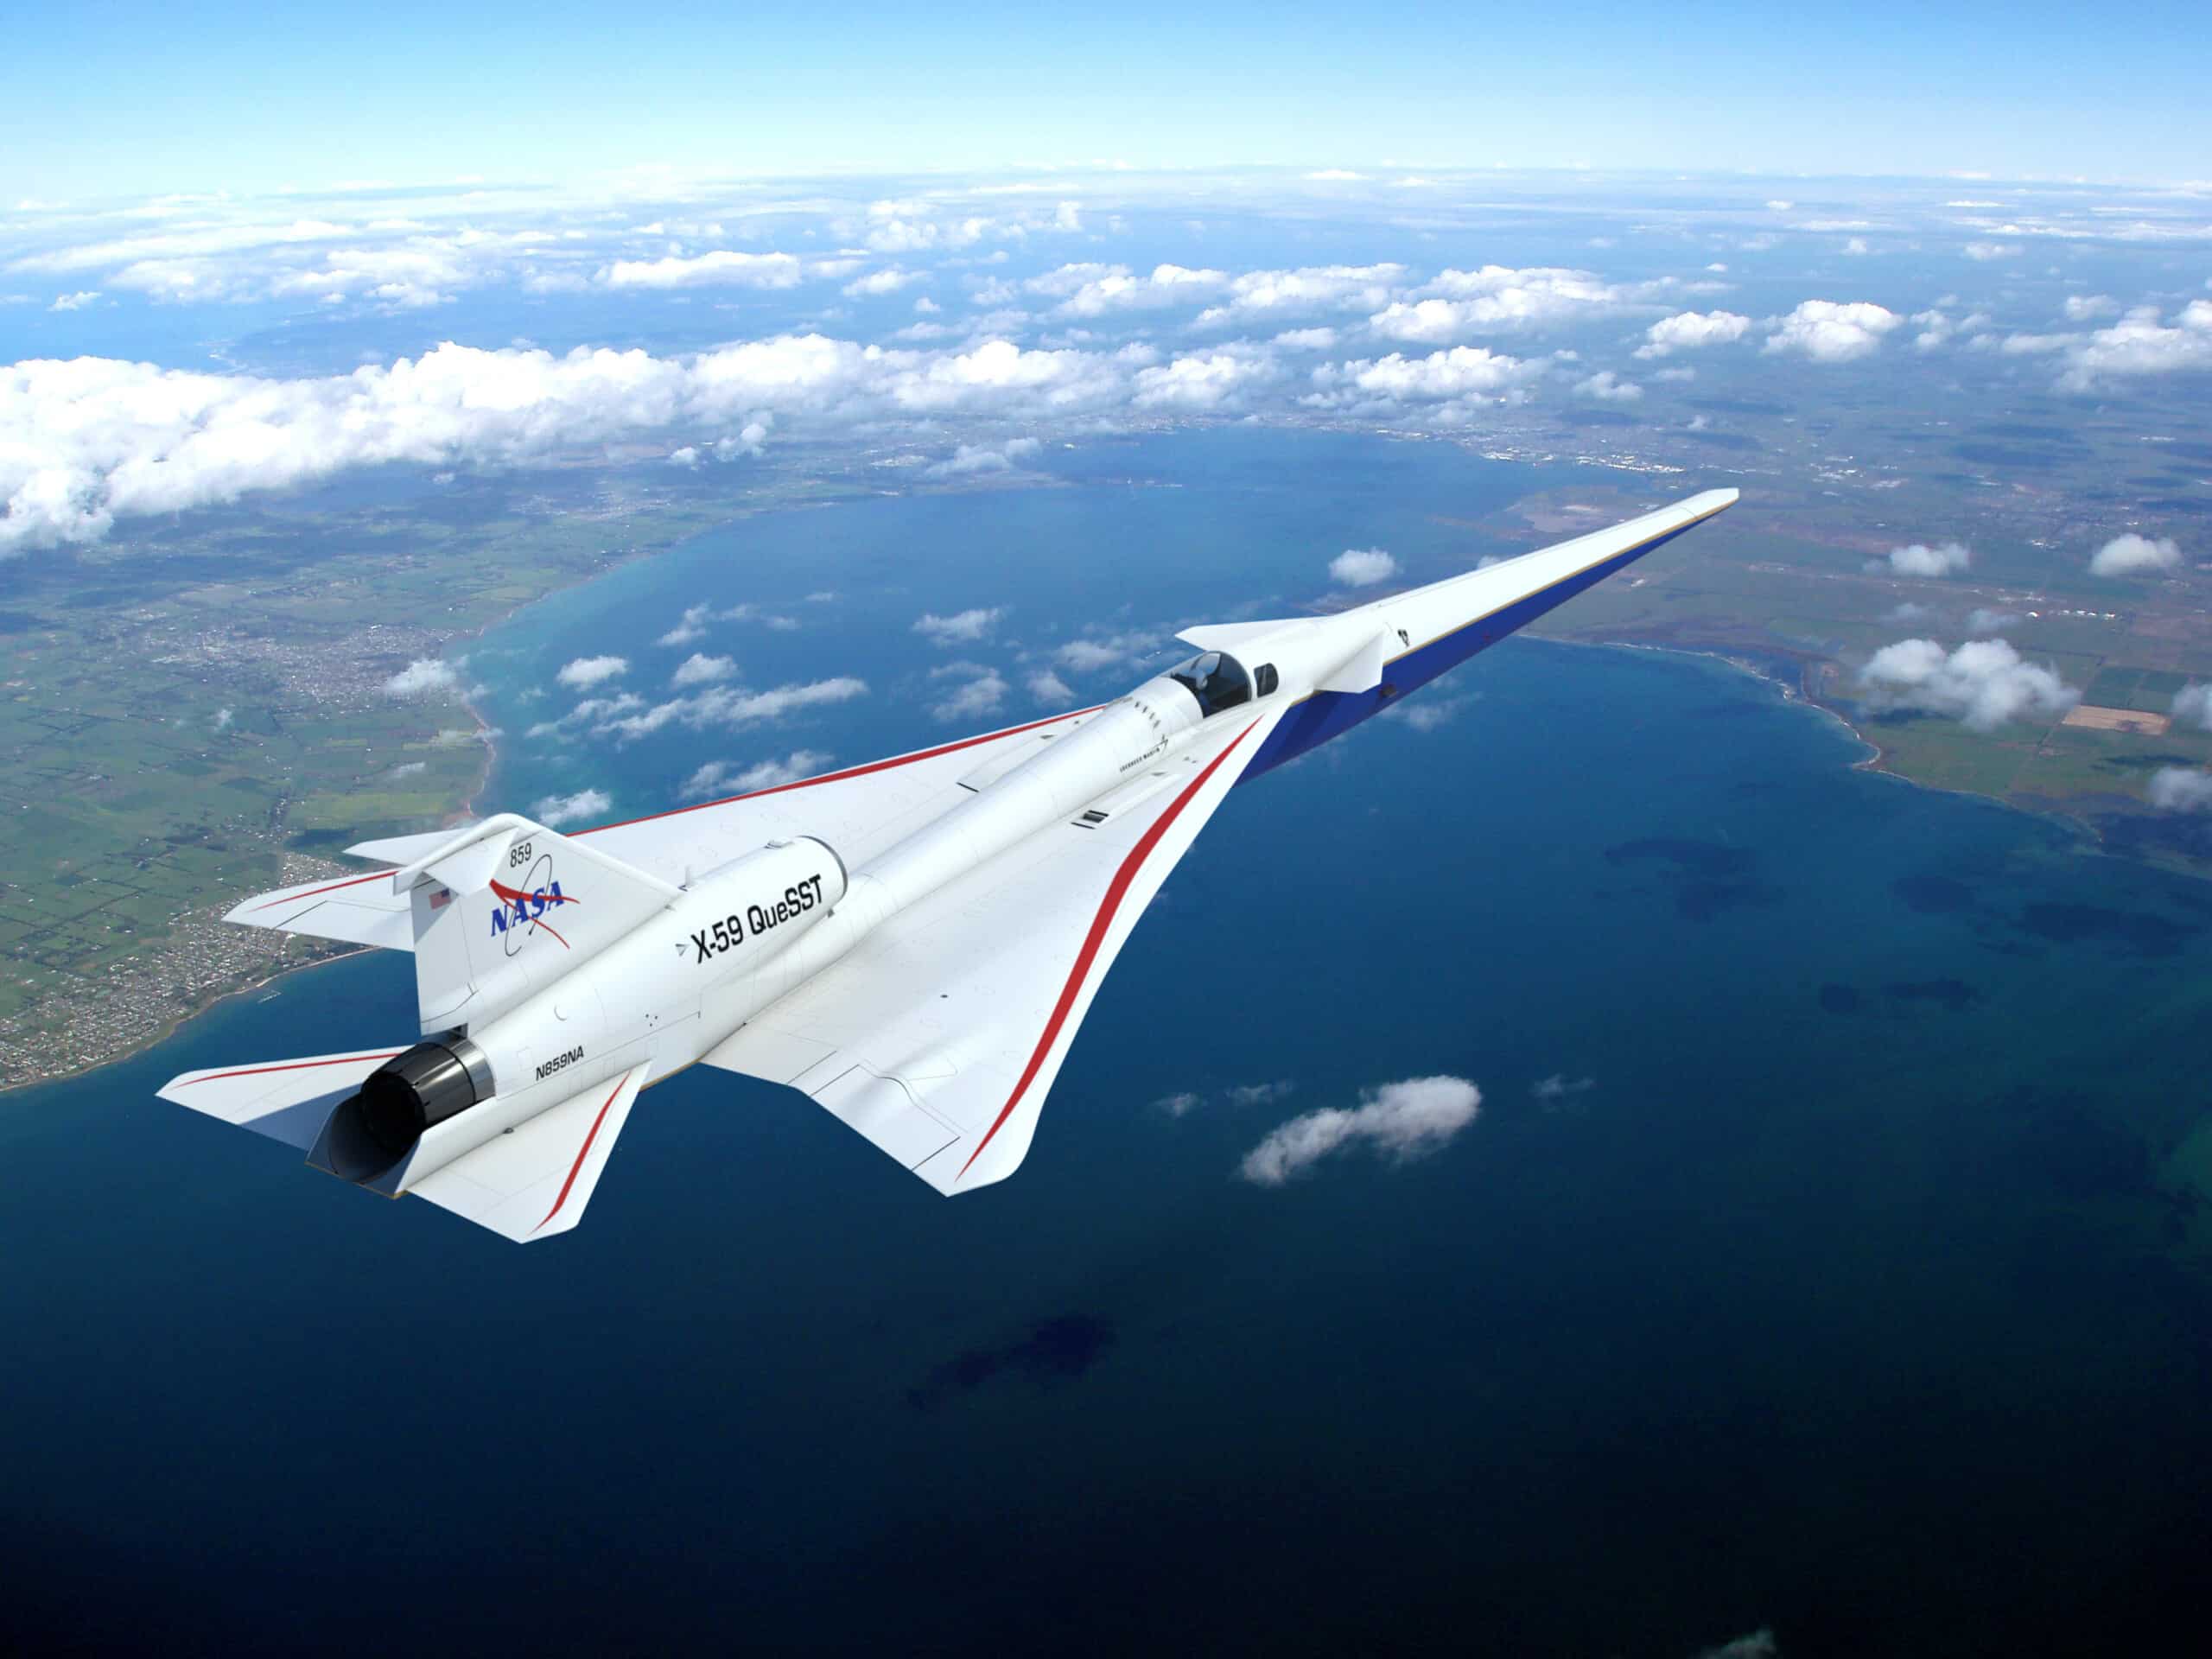 The History of the Concorde Supersonic Jet